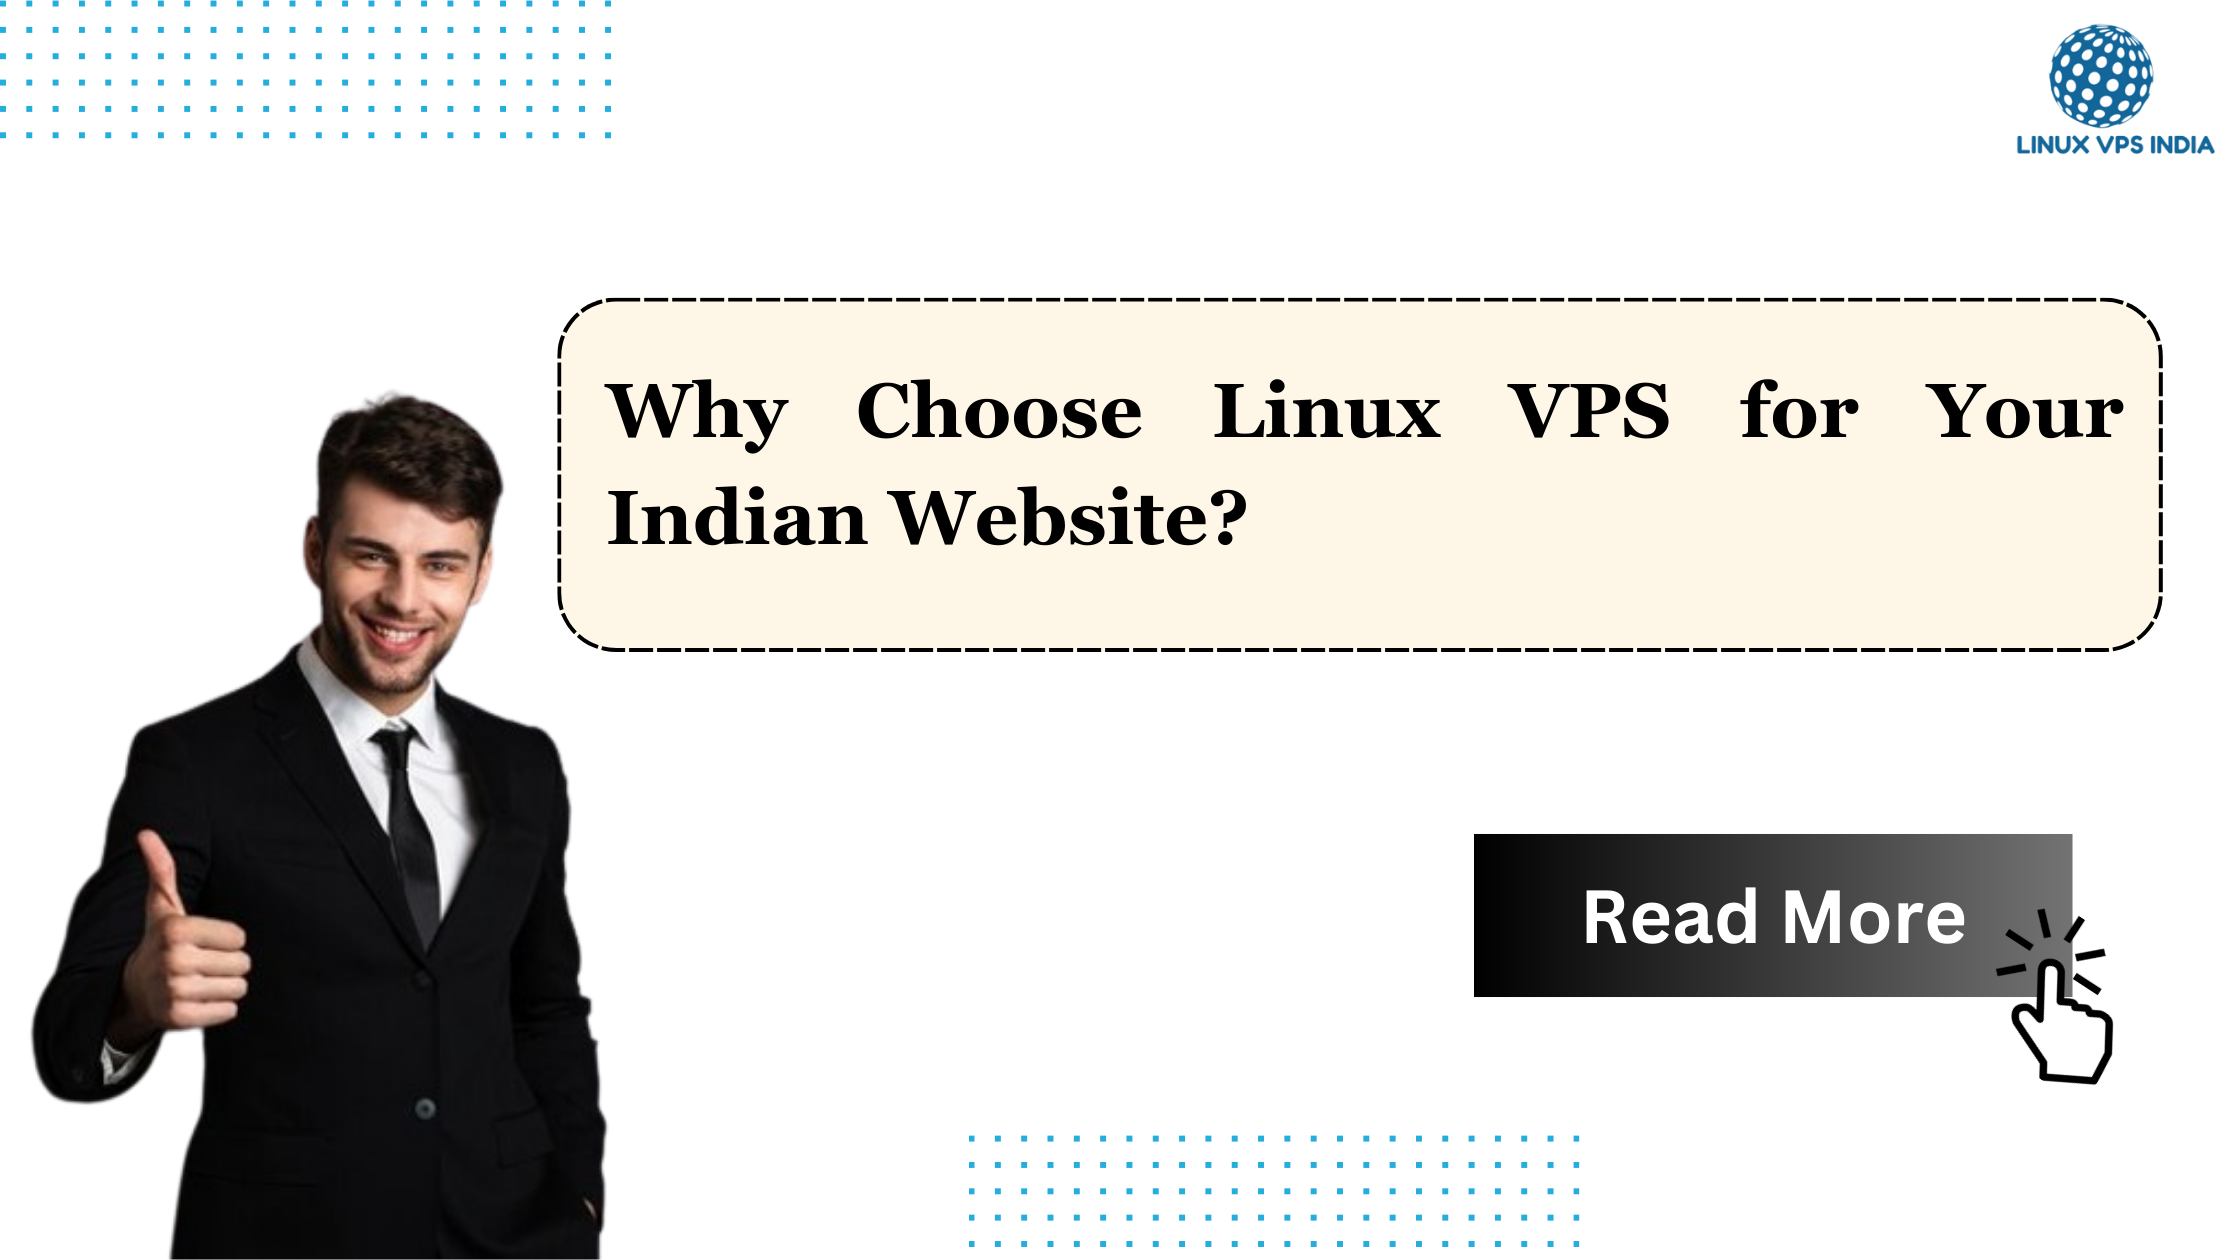 Why Choose Linux VPS for Your Indian Website